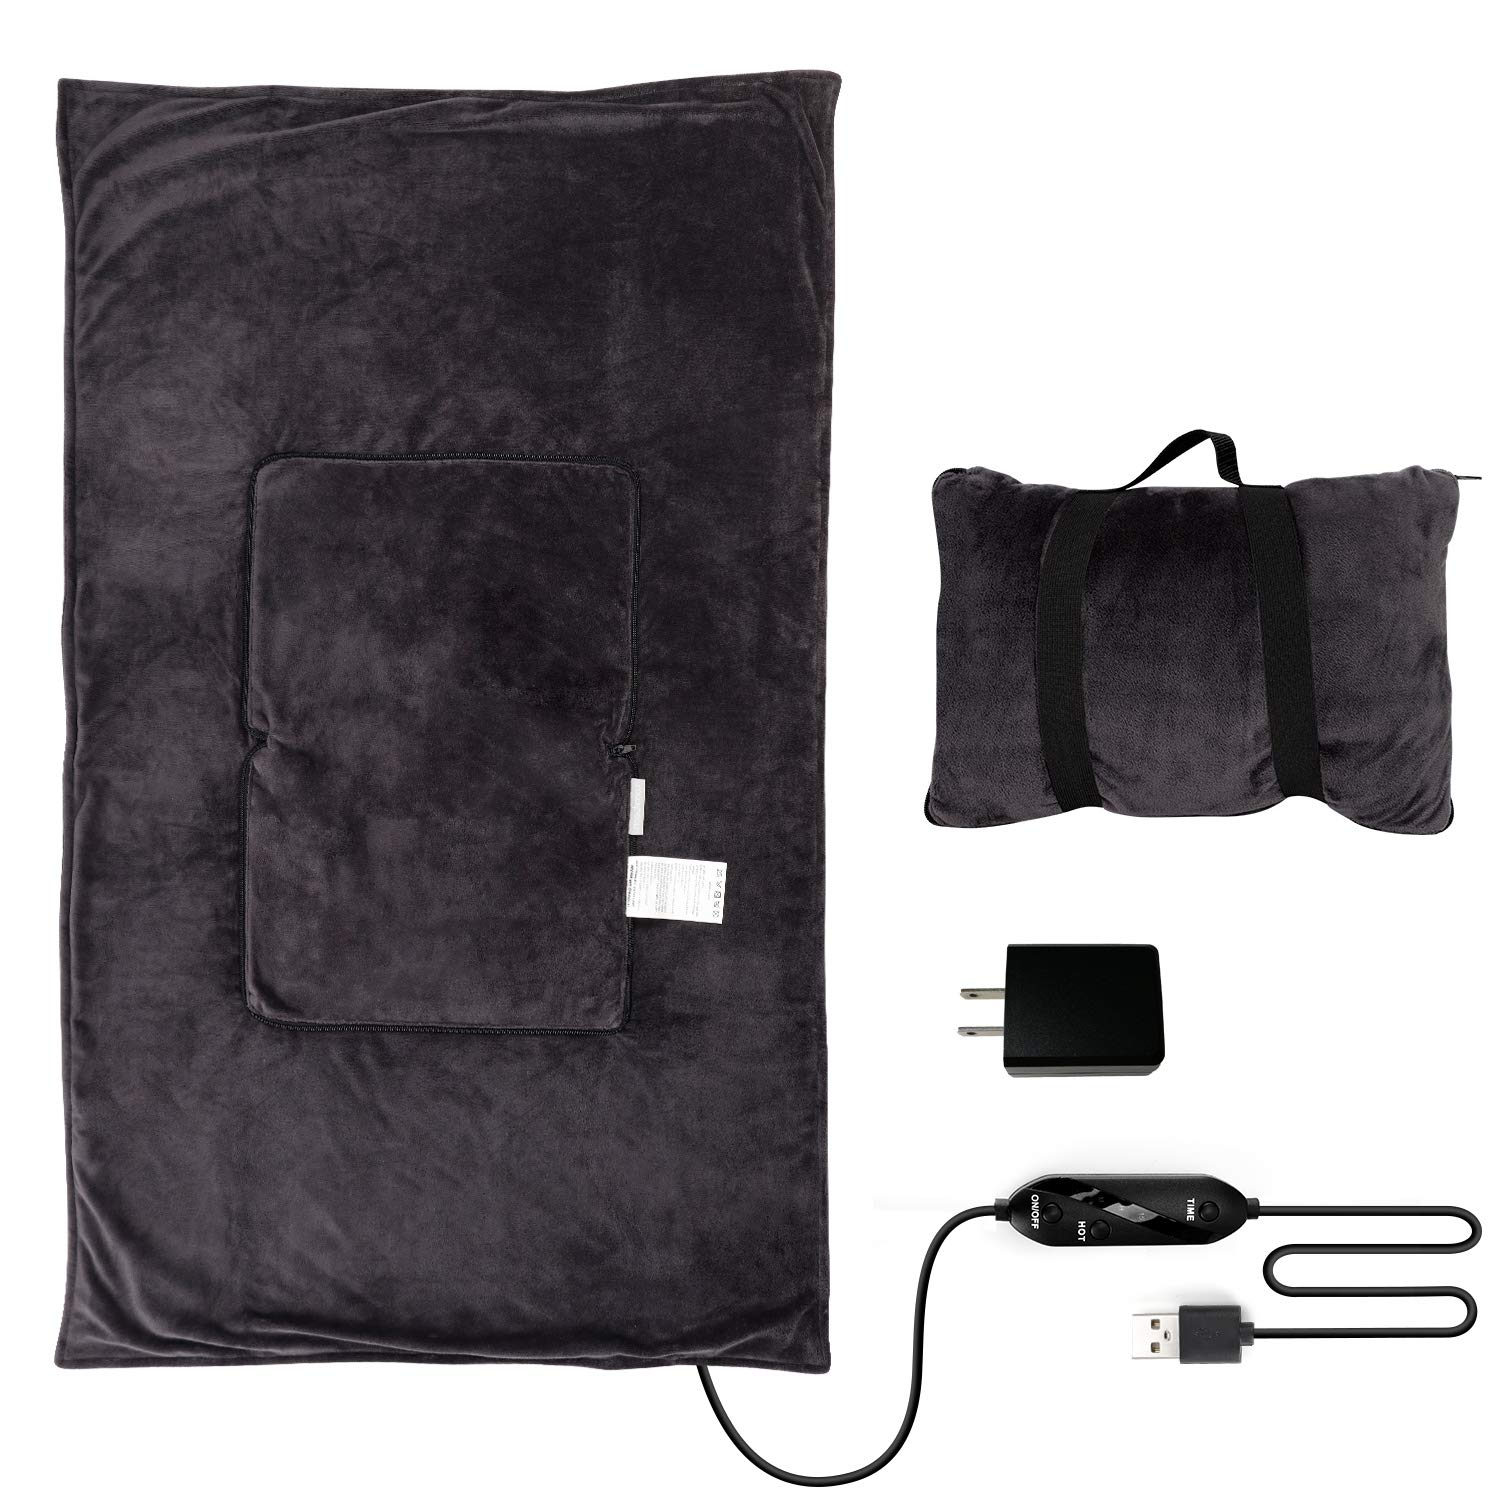 Portable Heated Blanket Battery Operated USB Heated Blanket Throw